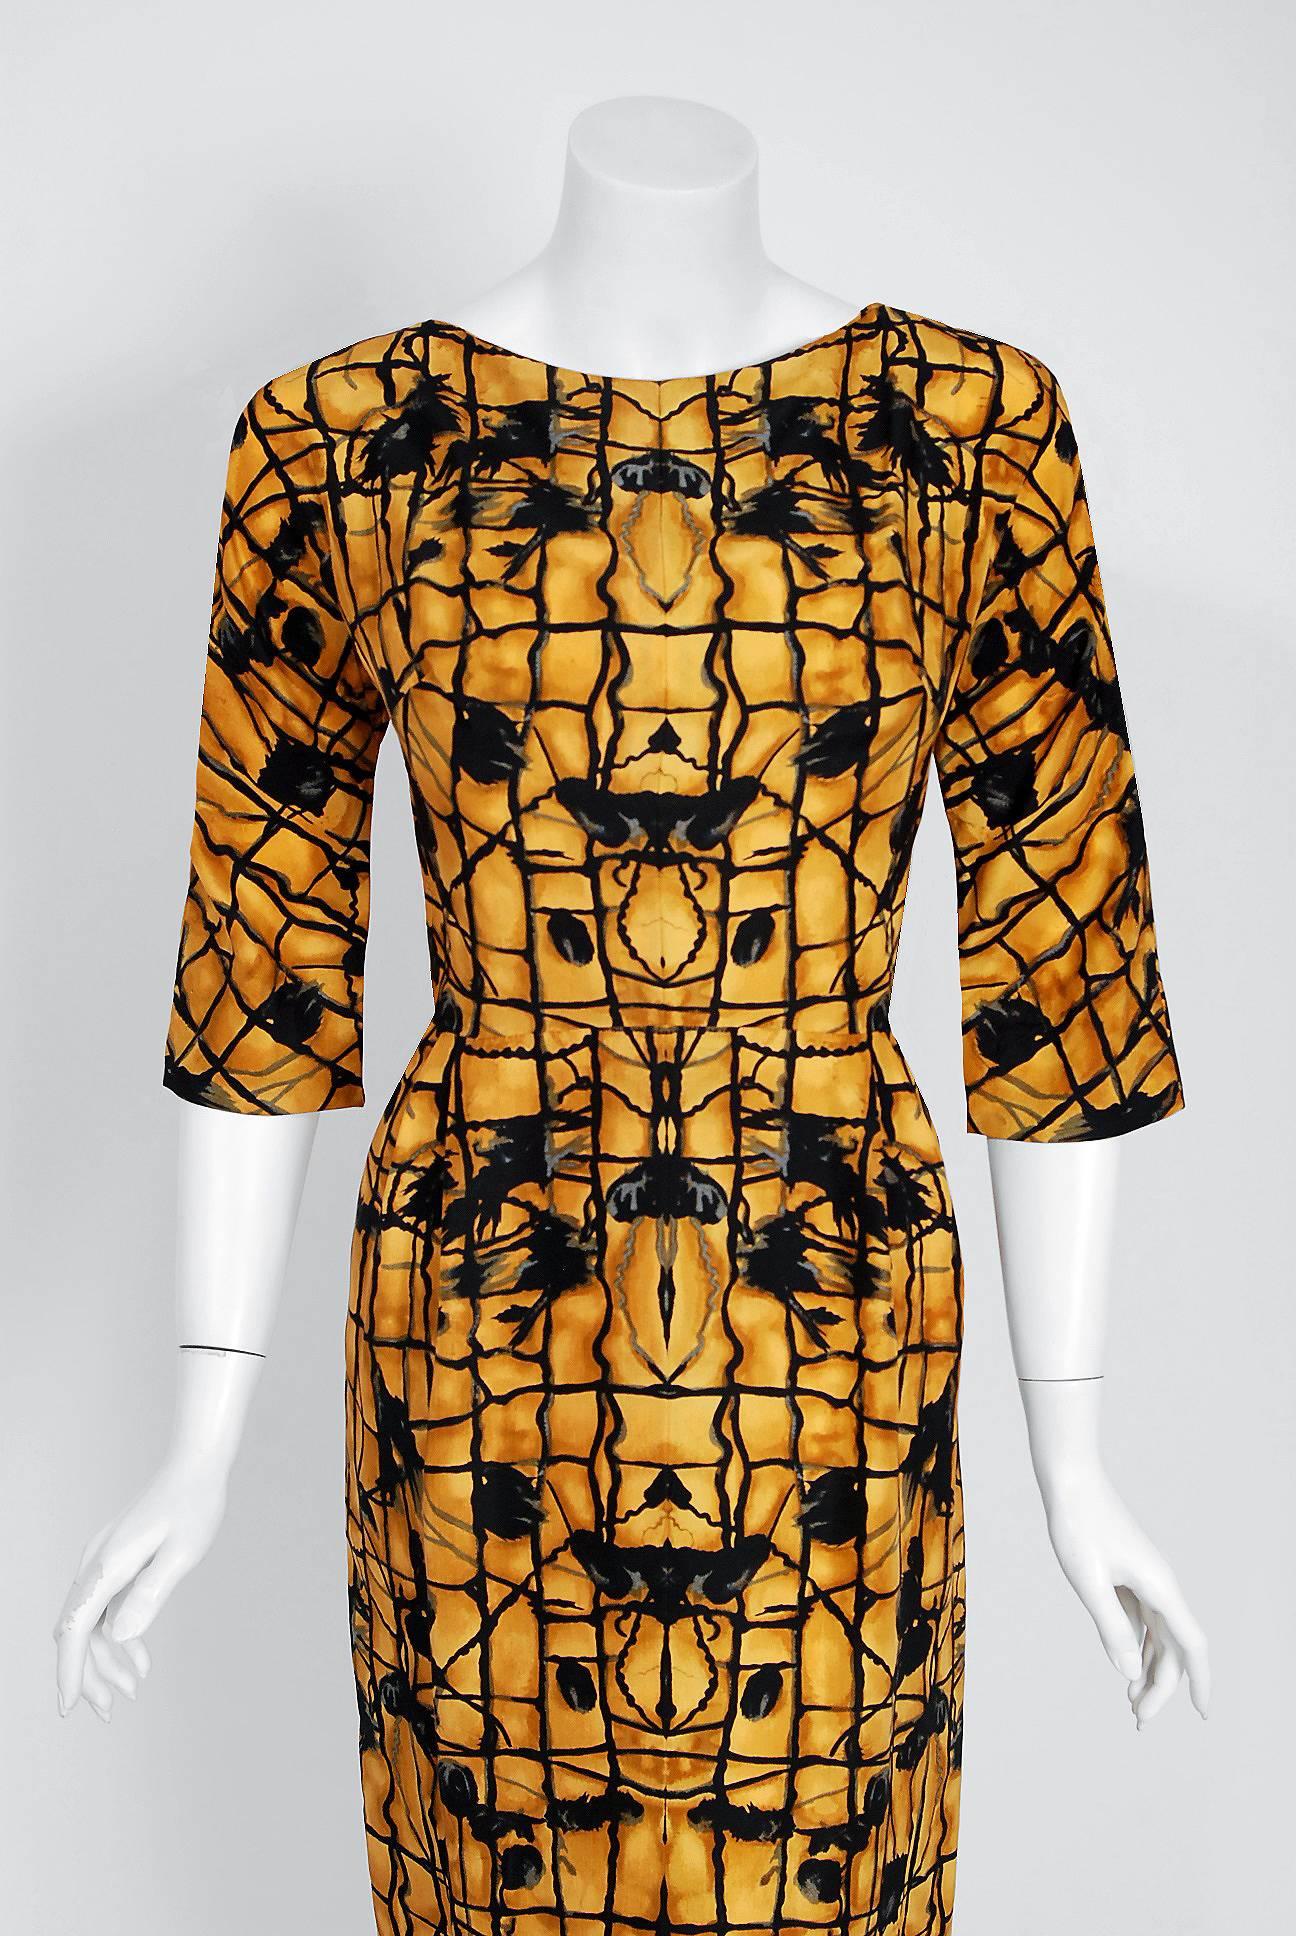 This breathtaking marigold-yellow and black graphic print cocktail, dating back to the mid 1950's, is a perfect example of Irene Lentz's genuis. Her pattern is so strikingly modern, it almost reminds me of an Alexander McQueen creation. The elegant